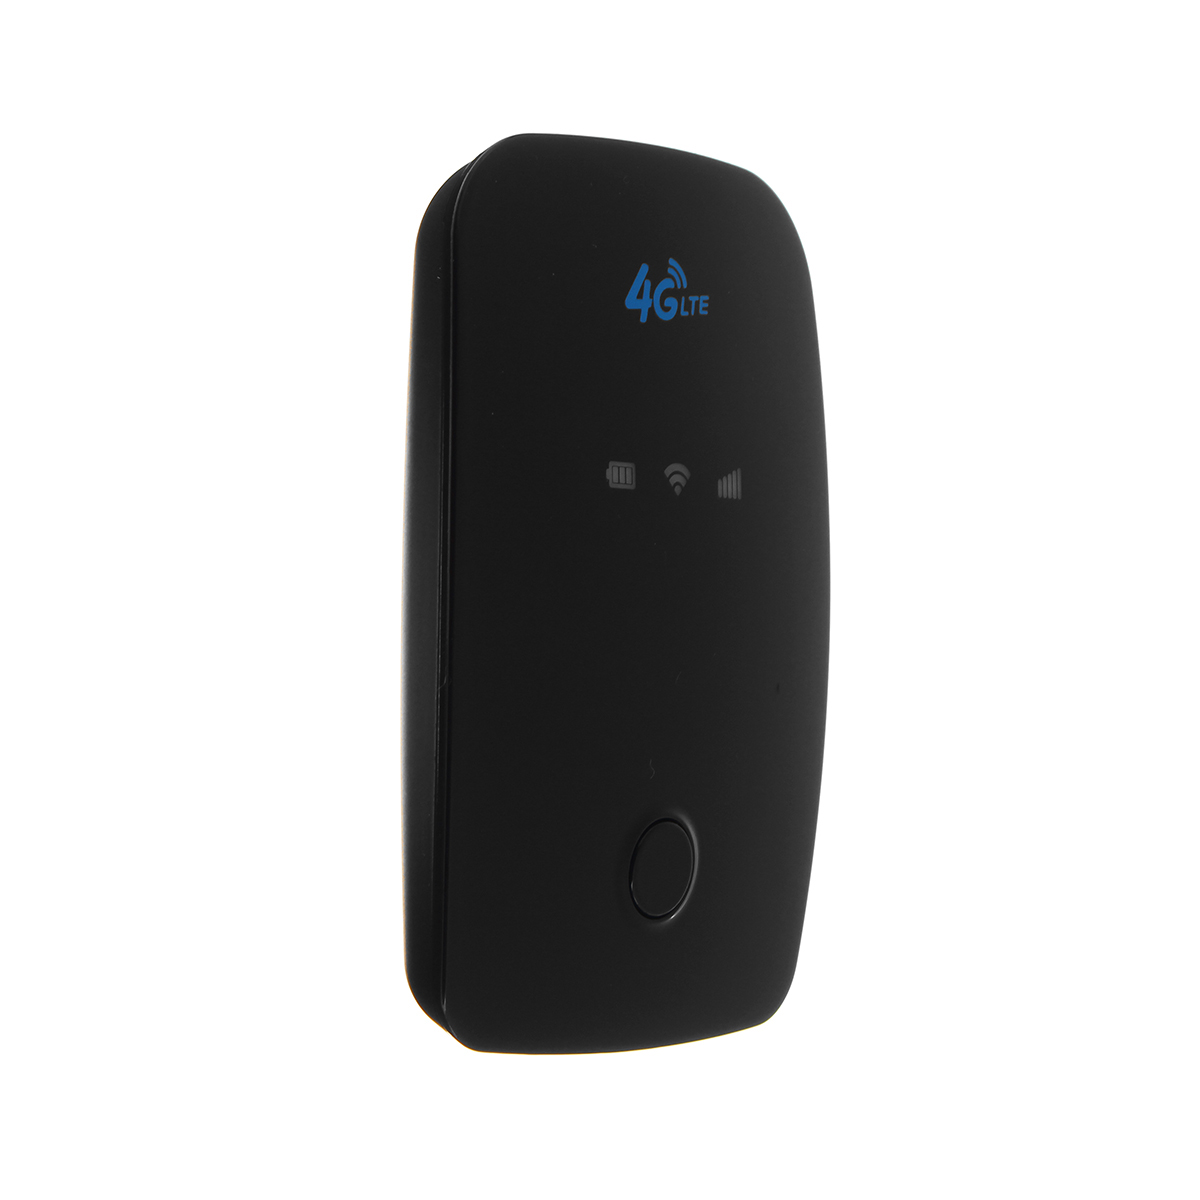 

2100mAh Mini Portable Pocket 4G LTE Wifi Wireless Router 150Mbps Data Transmission Carte SIM for Smartphones, Tablets, P